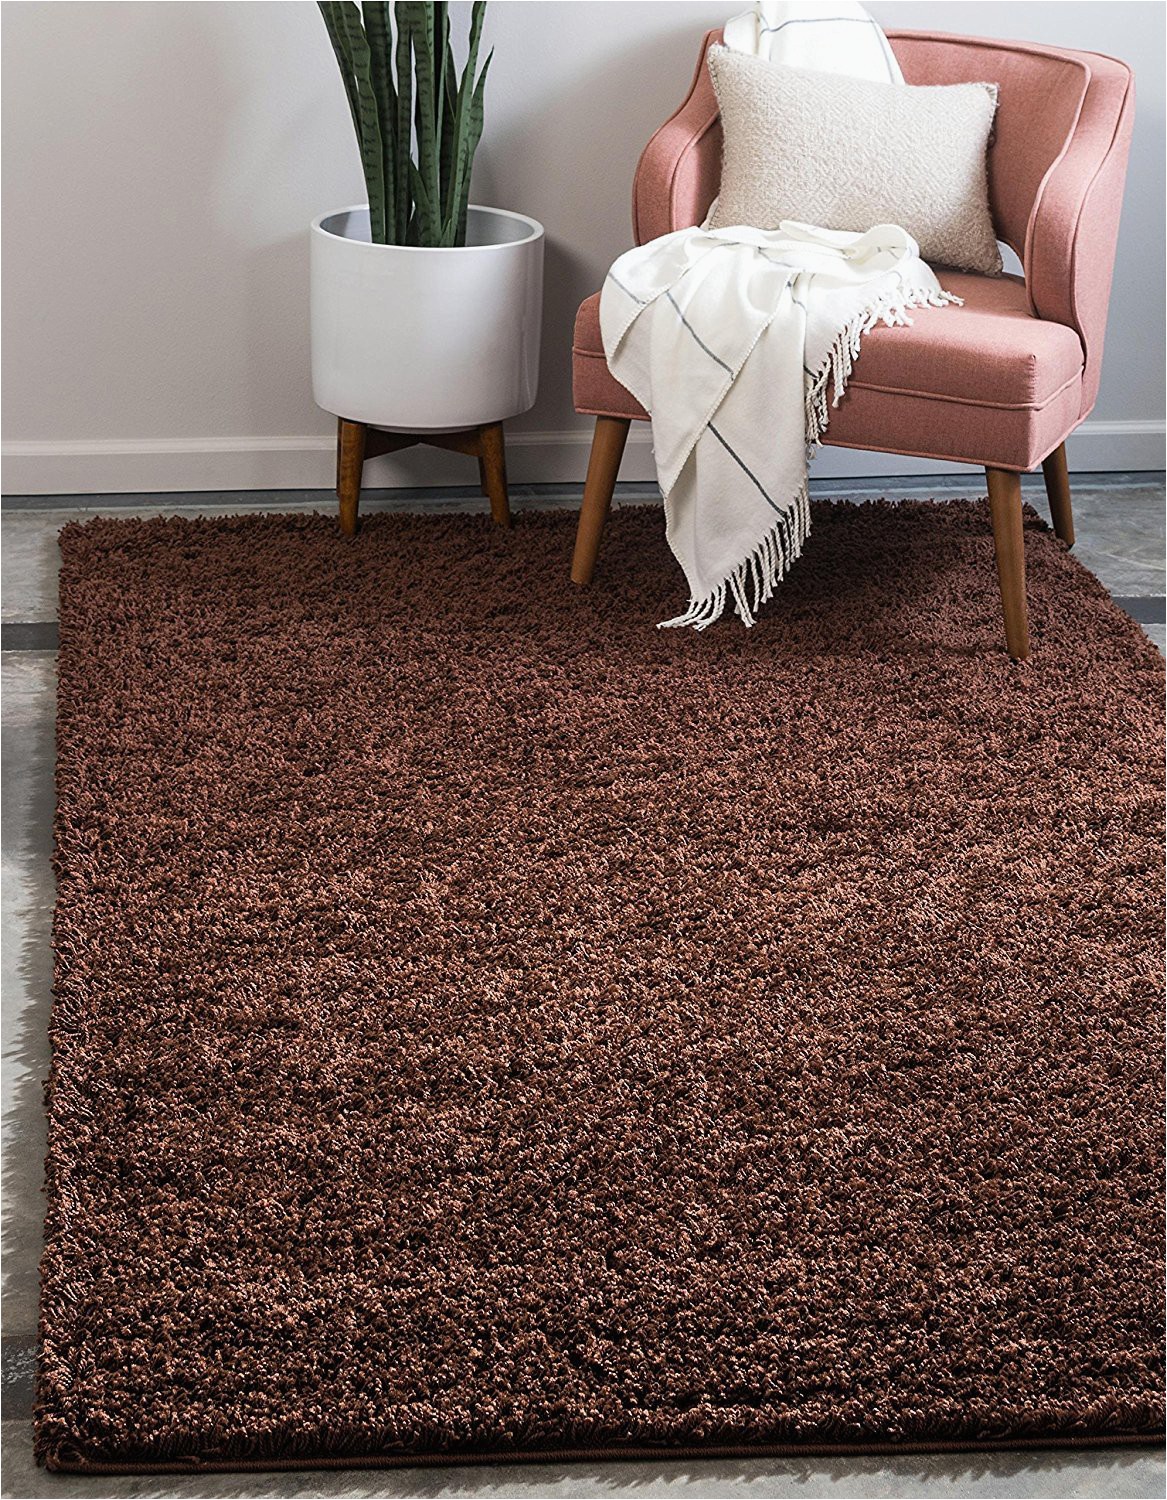 Large Thick soft area Rugs Bravich Rugmasters Chocolate Brown Extra Rug 5 Cm Thick Shag Pile soft Shaggy area Rugs Modern Carpet Living Room Bedroom Mats 160 X 230 Cm